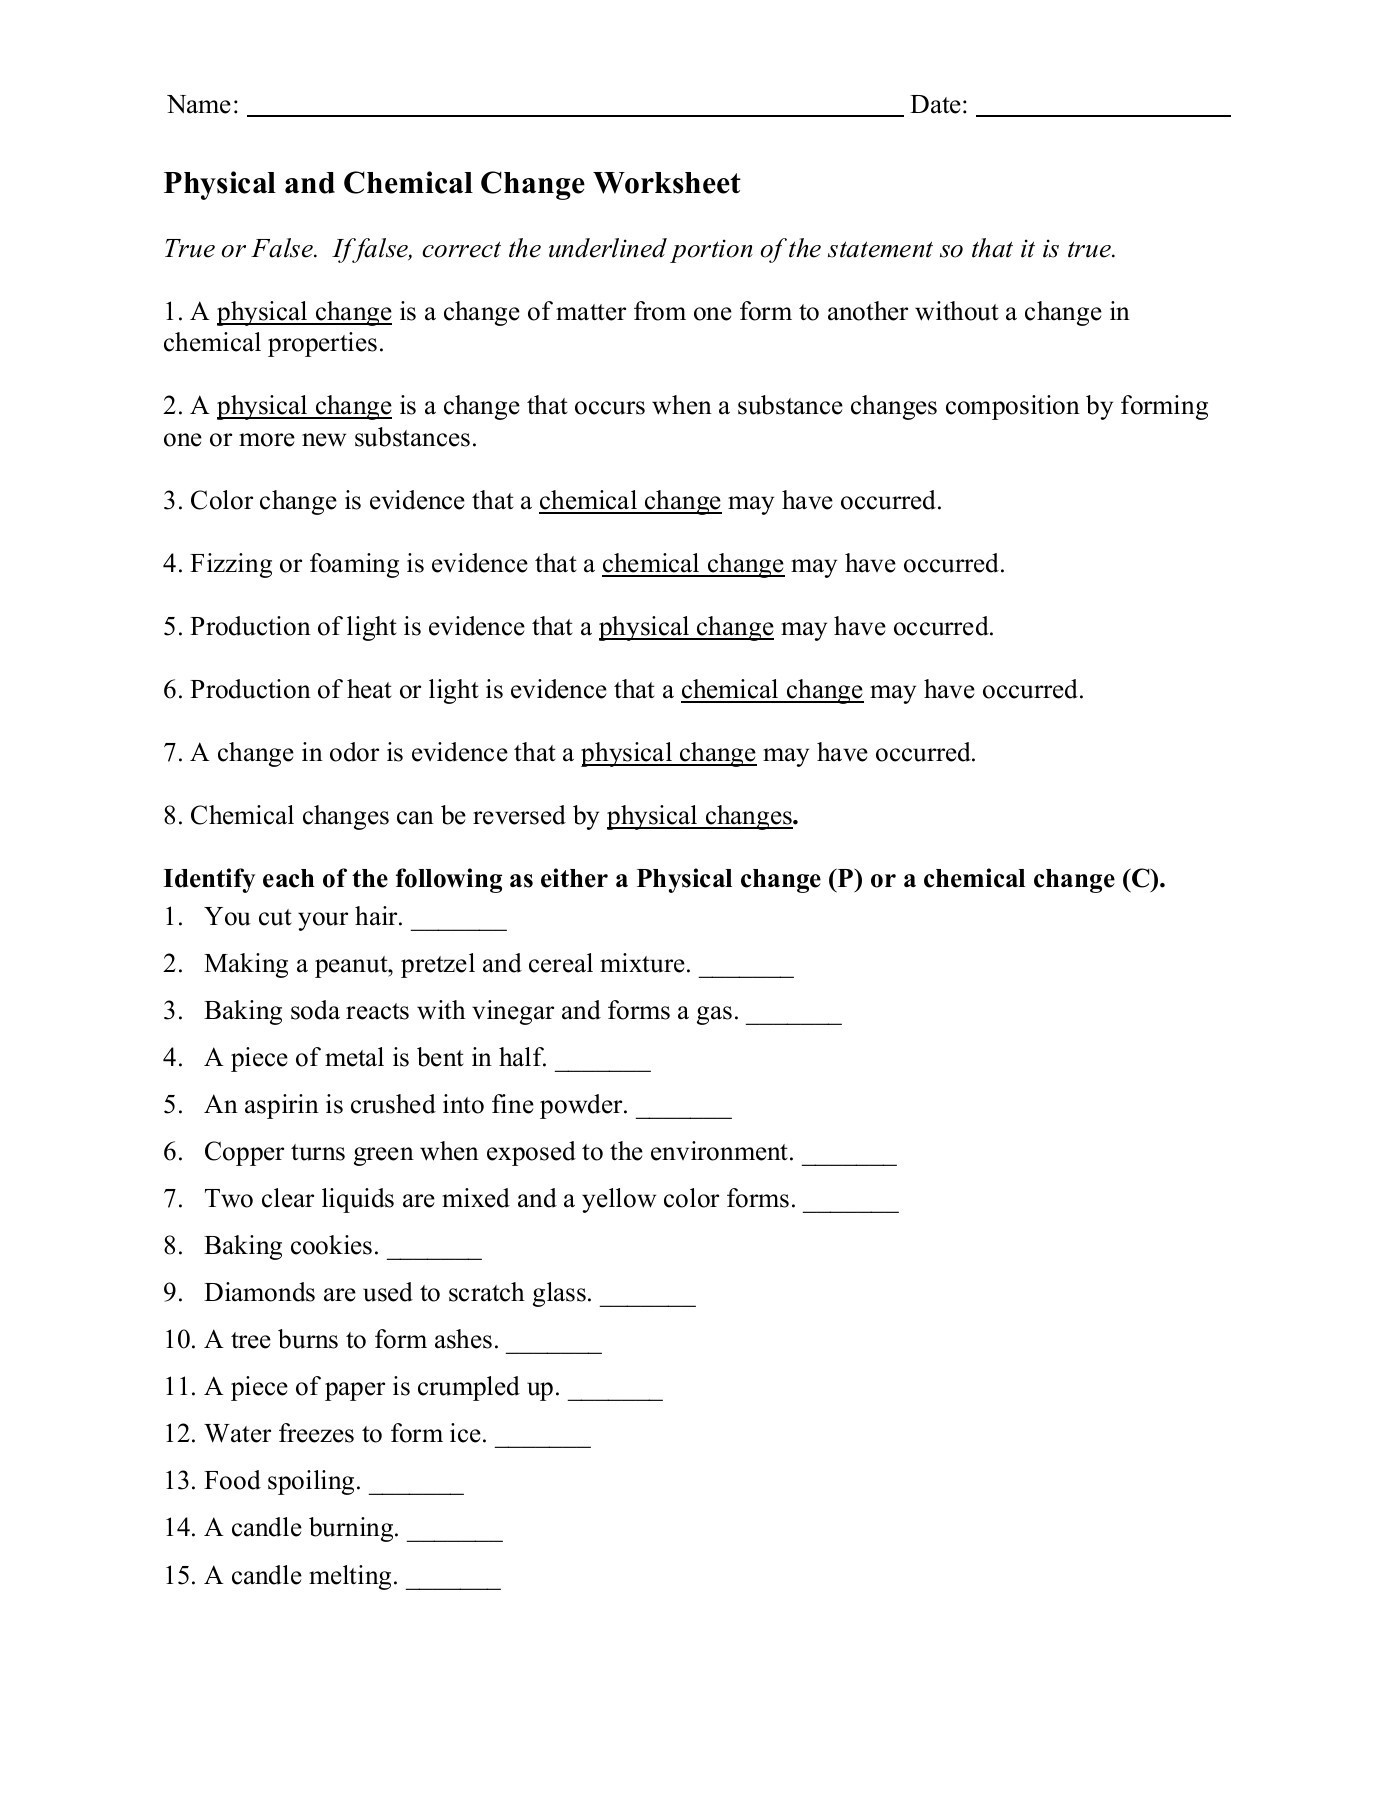 Chemical and Physical Change Worksheet Physical and Chemical Change Worksheet